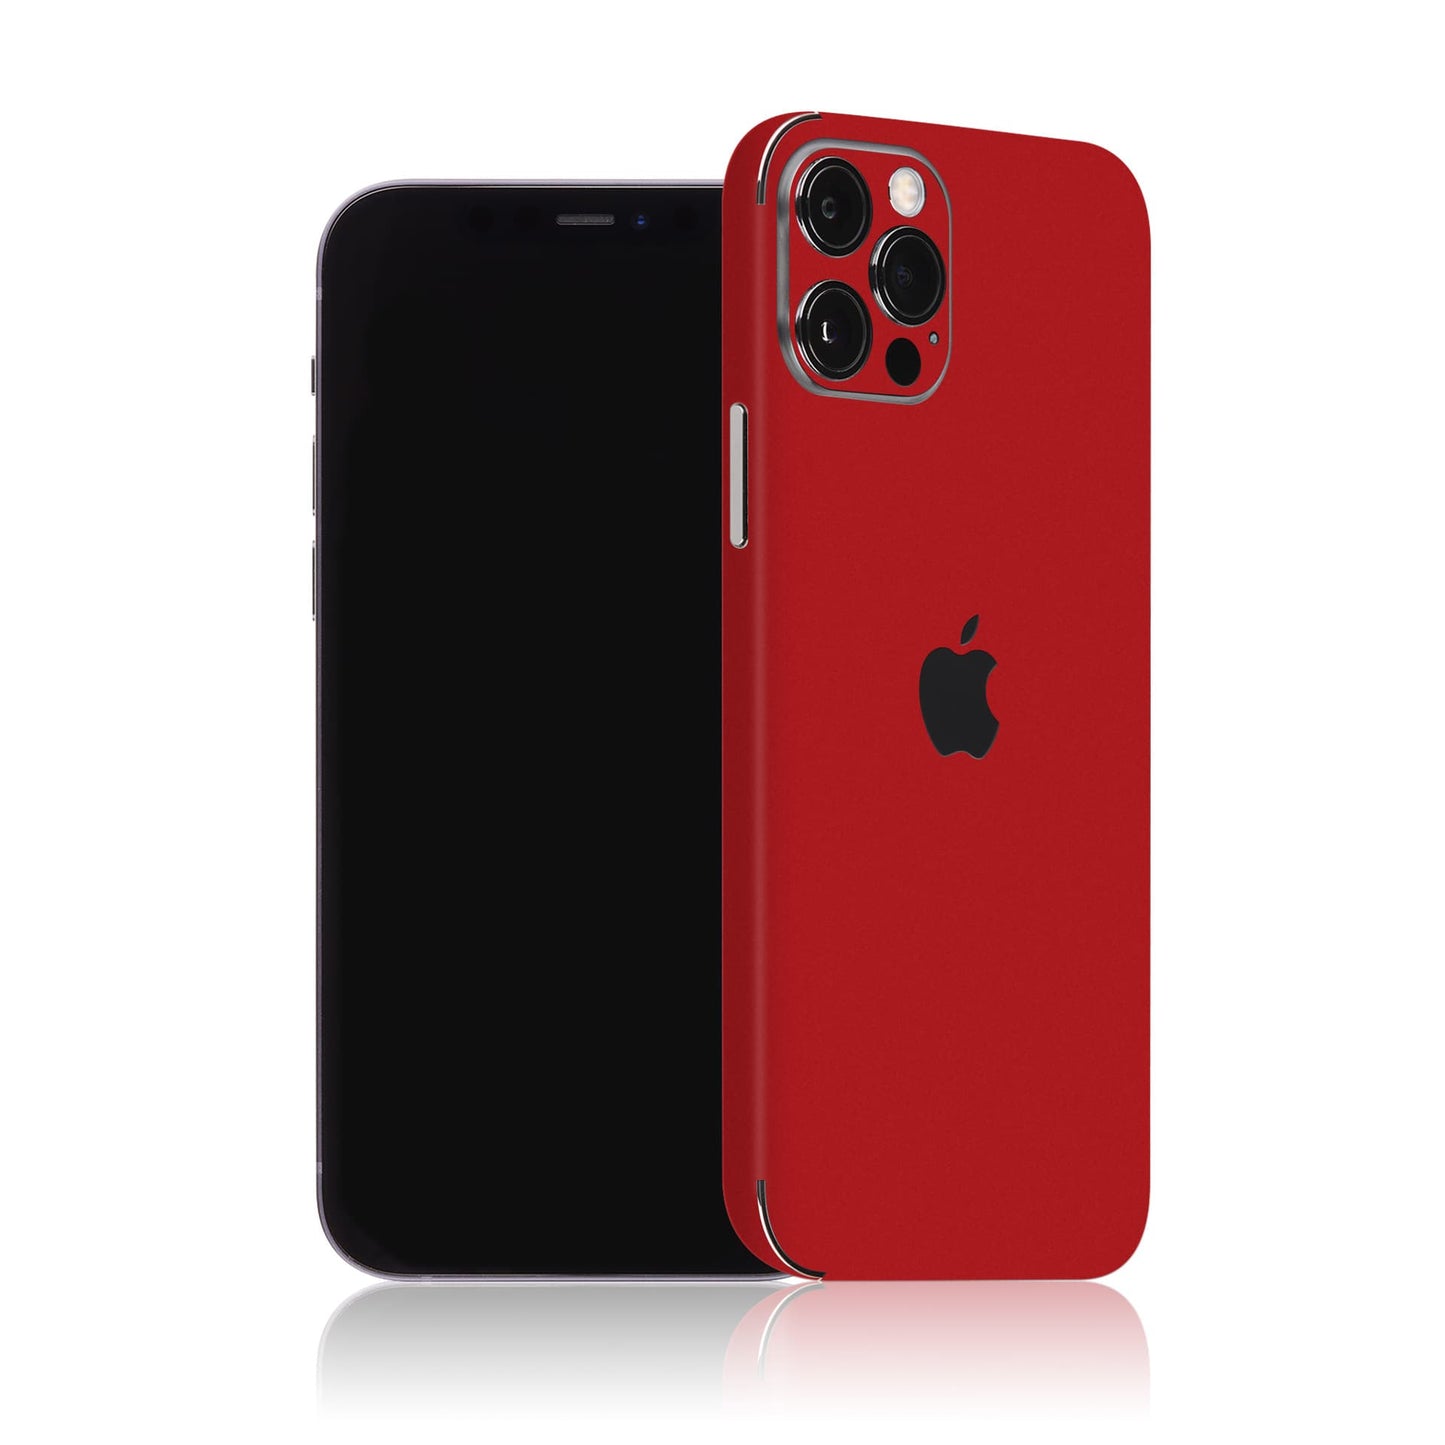 iPhone 12 Pro Max - Color Edition